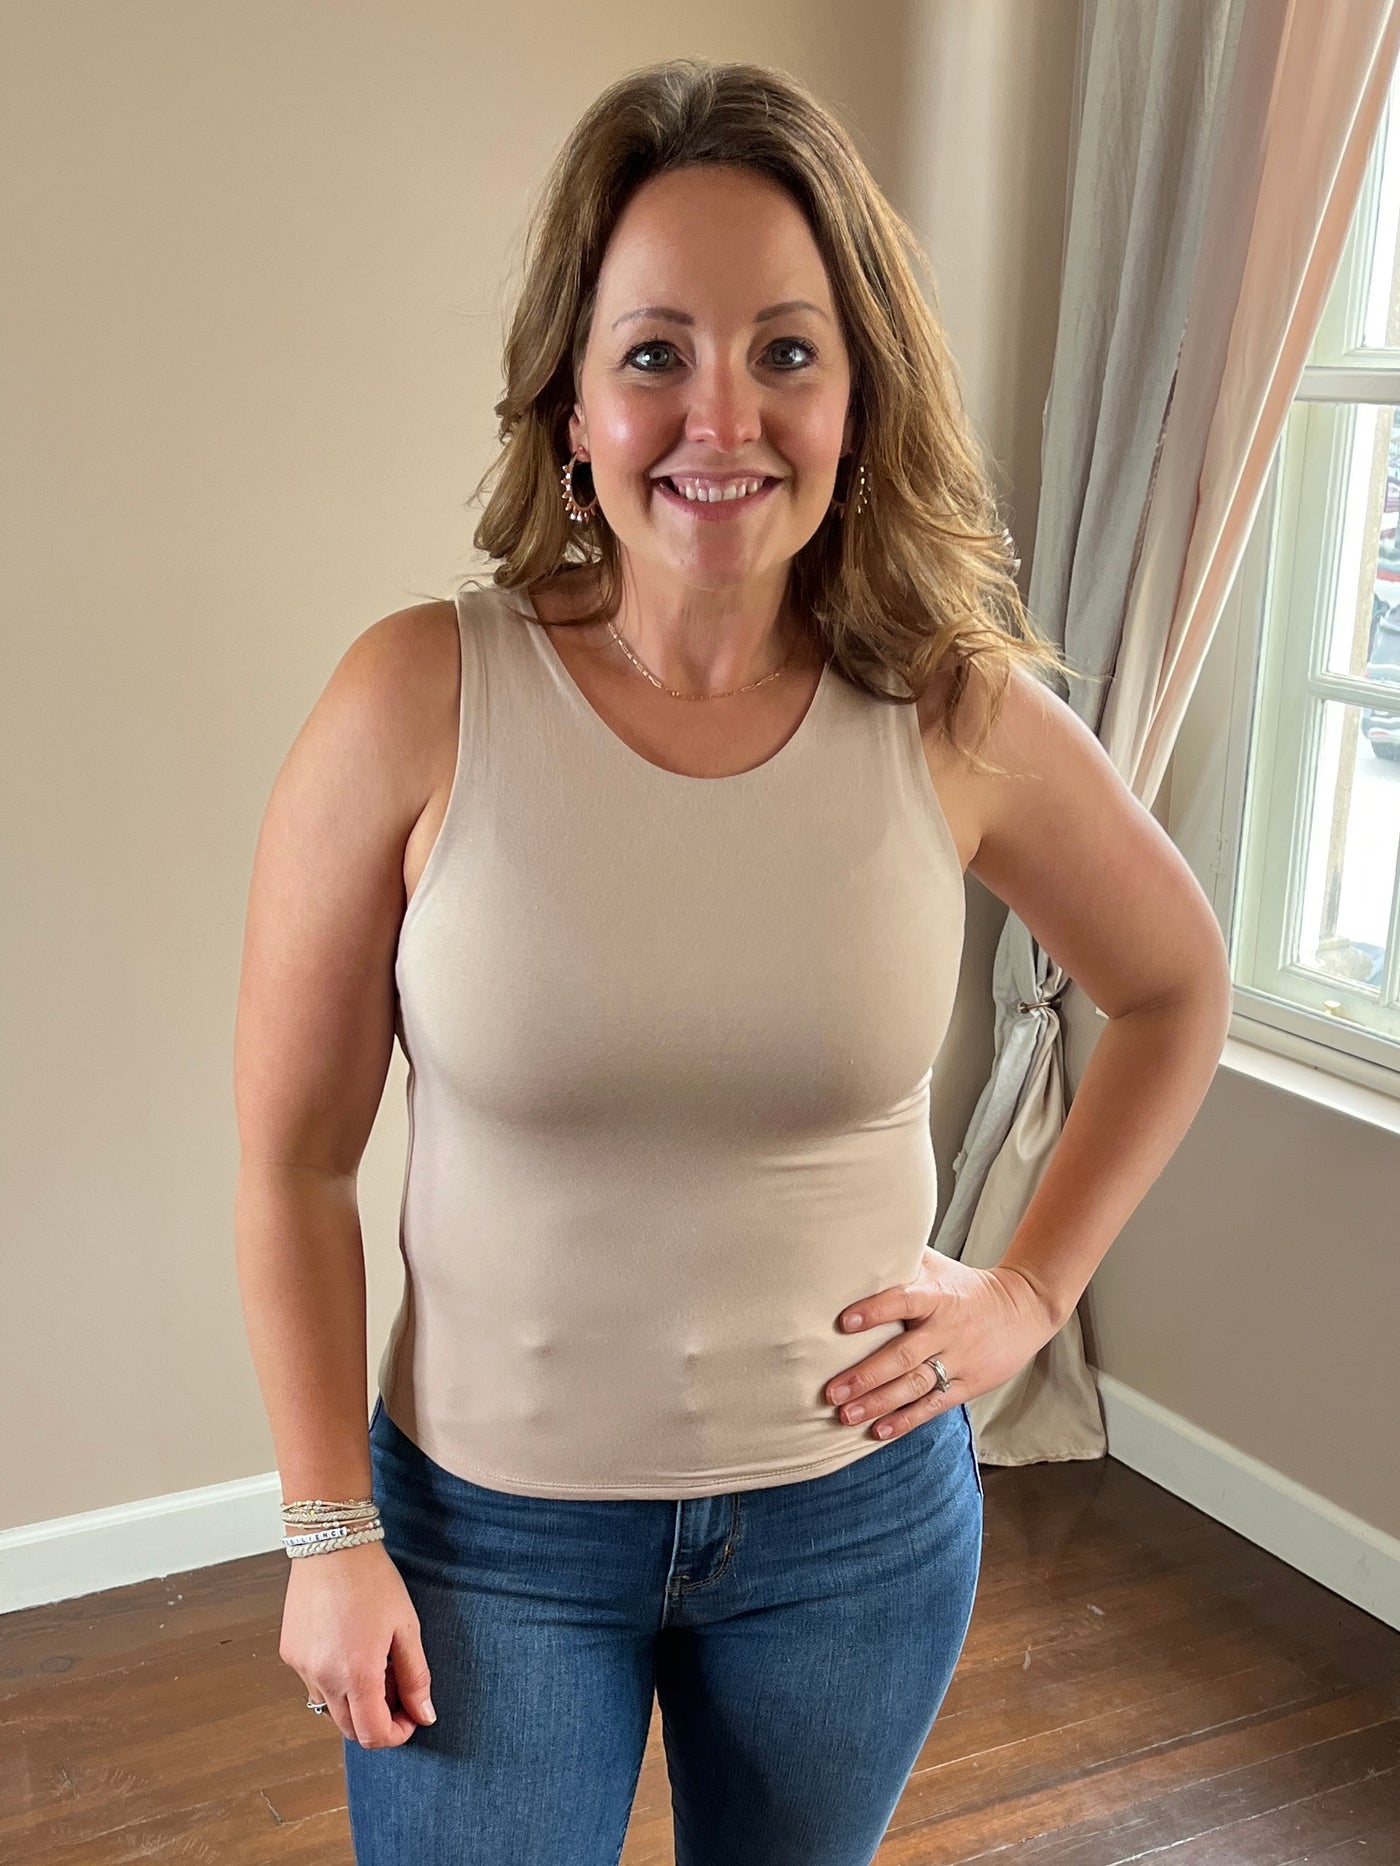 Taupe High Neck Tank